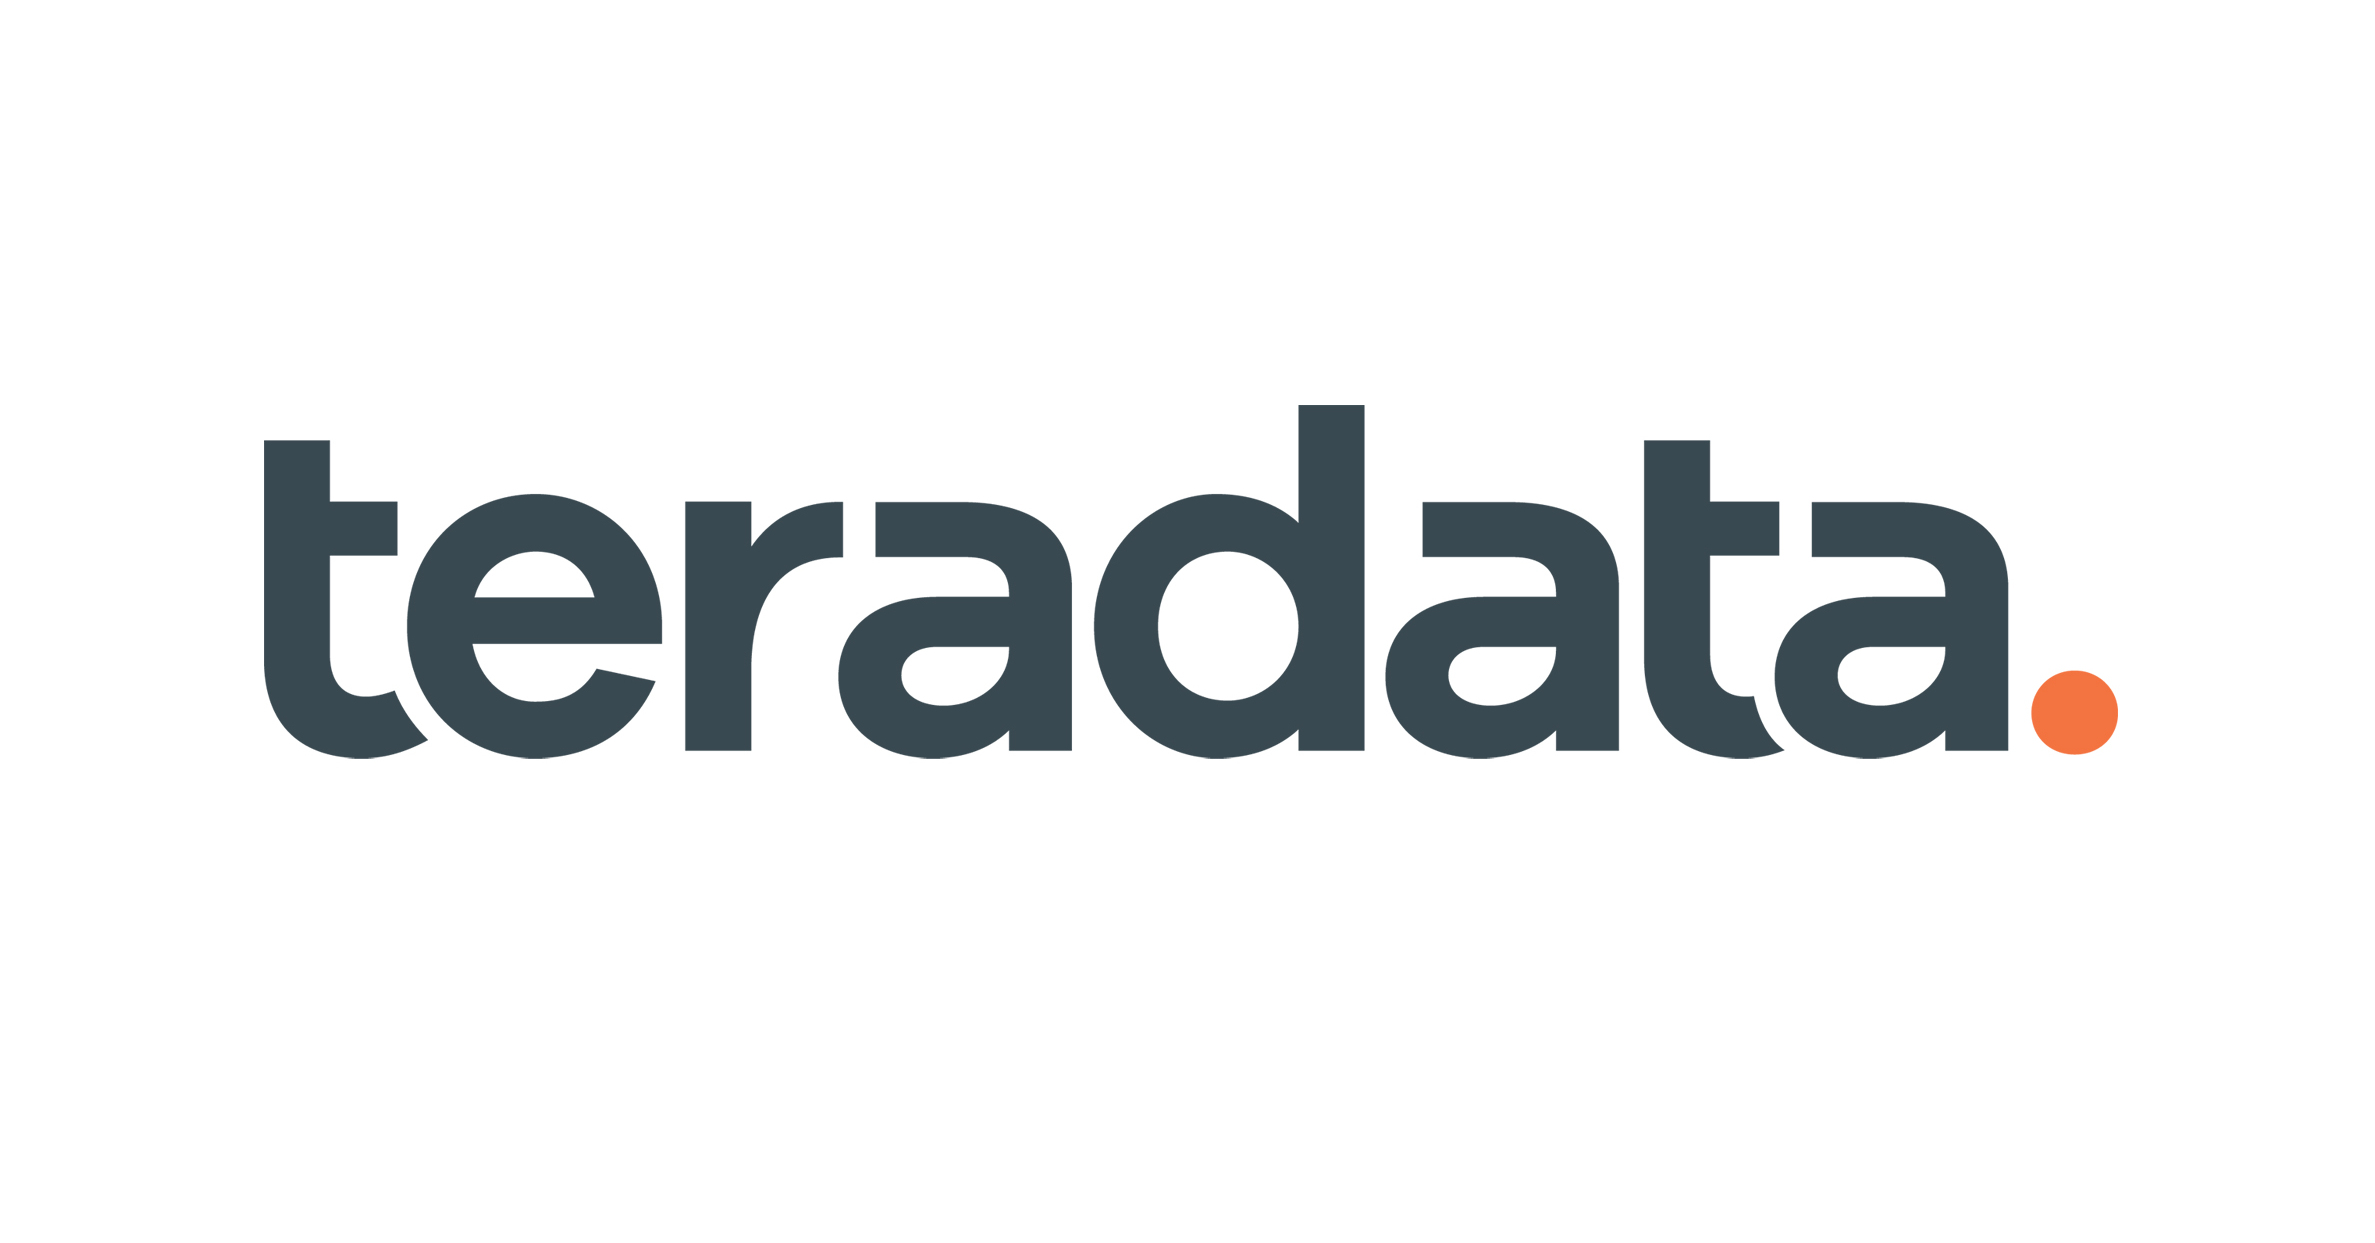  Teradata  Helps Clients Fast Track Business Value with AI